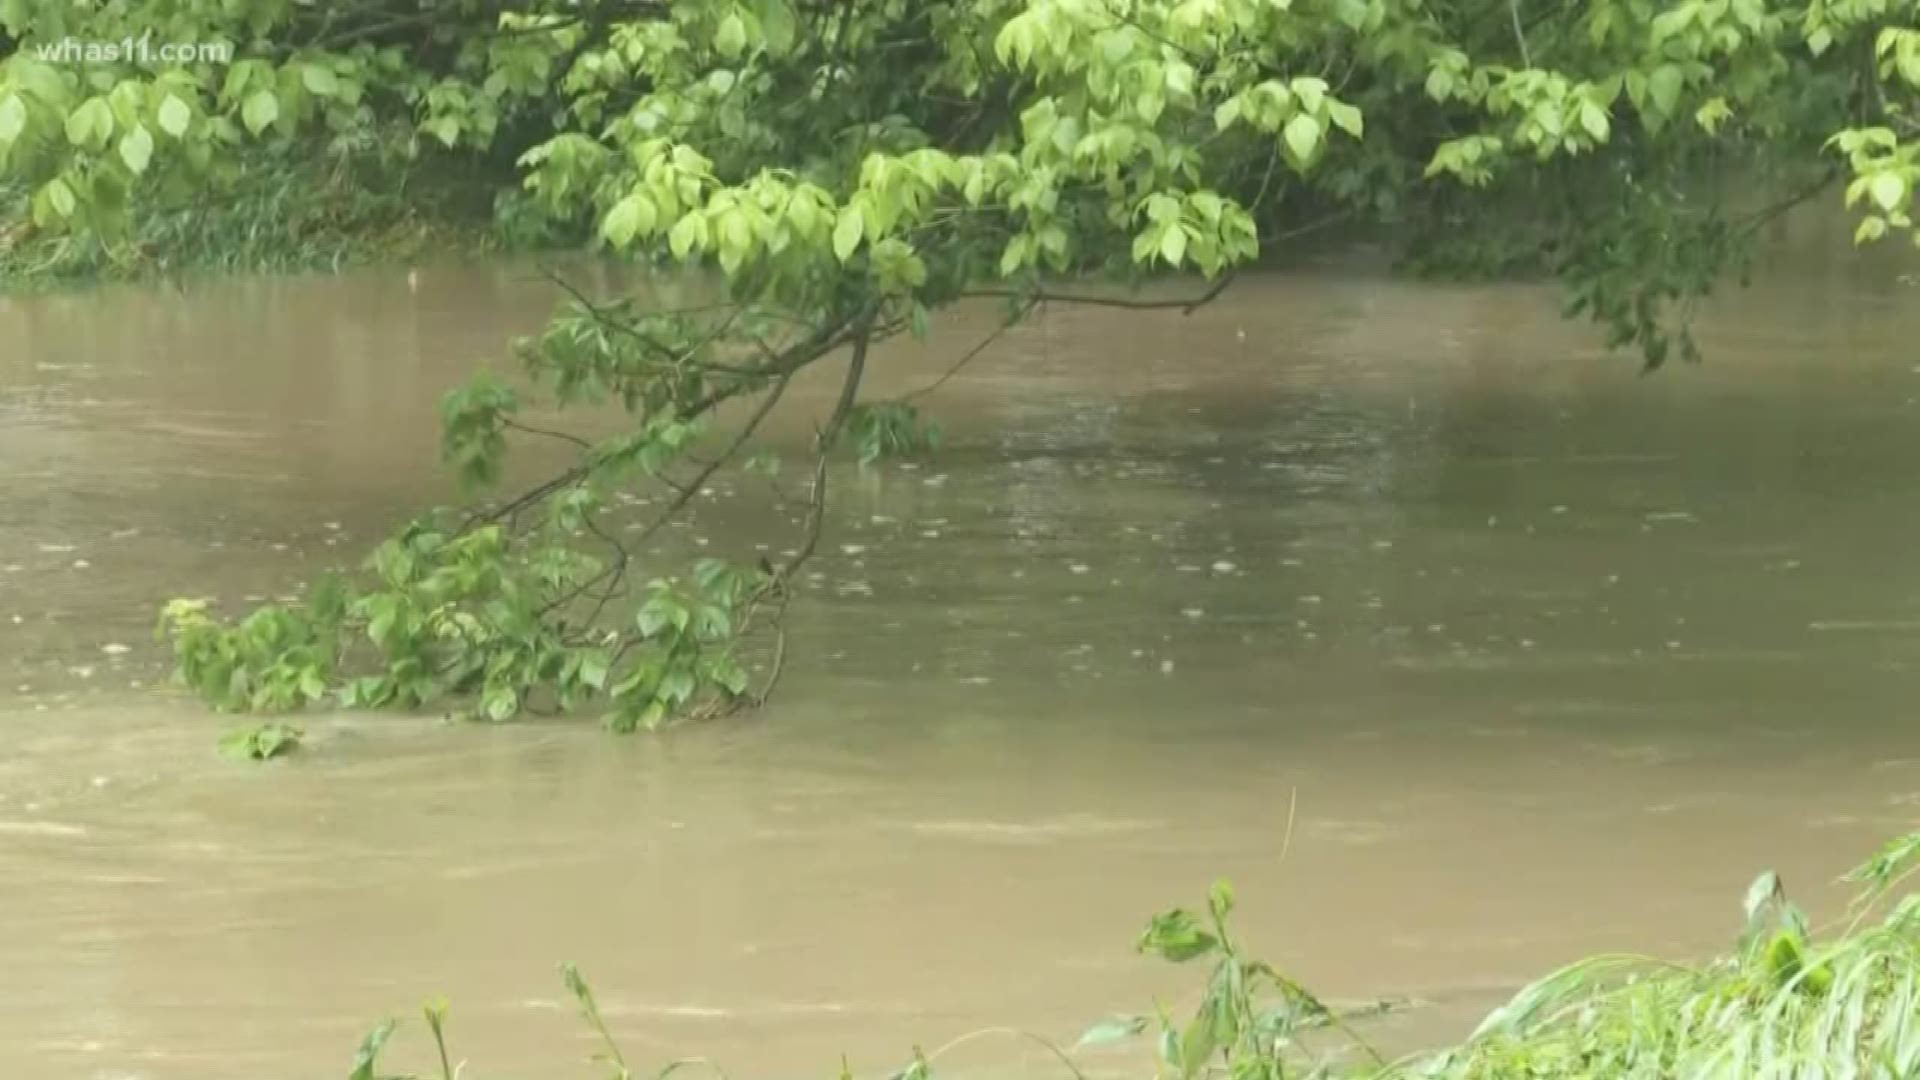 A family had just finished a Father's Day celebration Sunday when they tried to drive across a flooded bridge and became trapped.